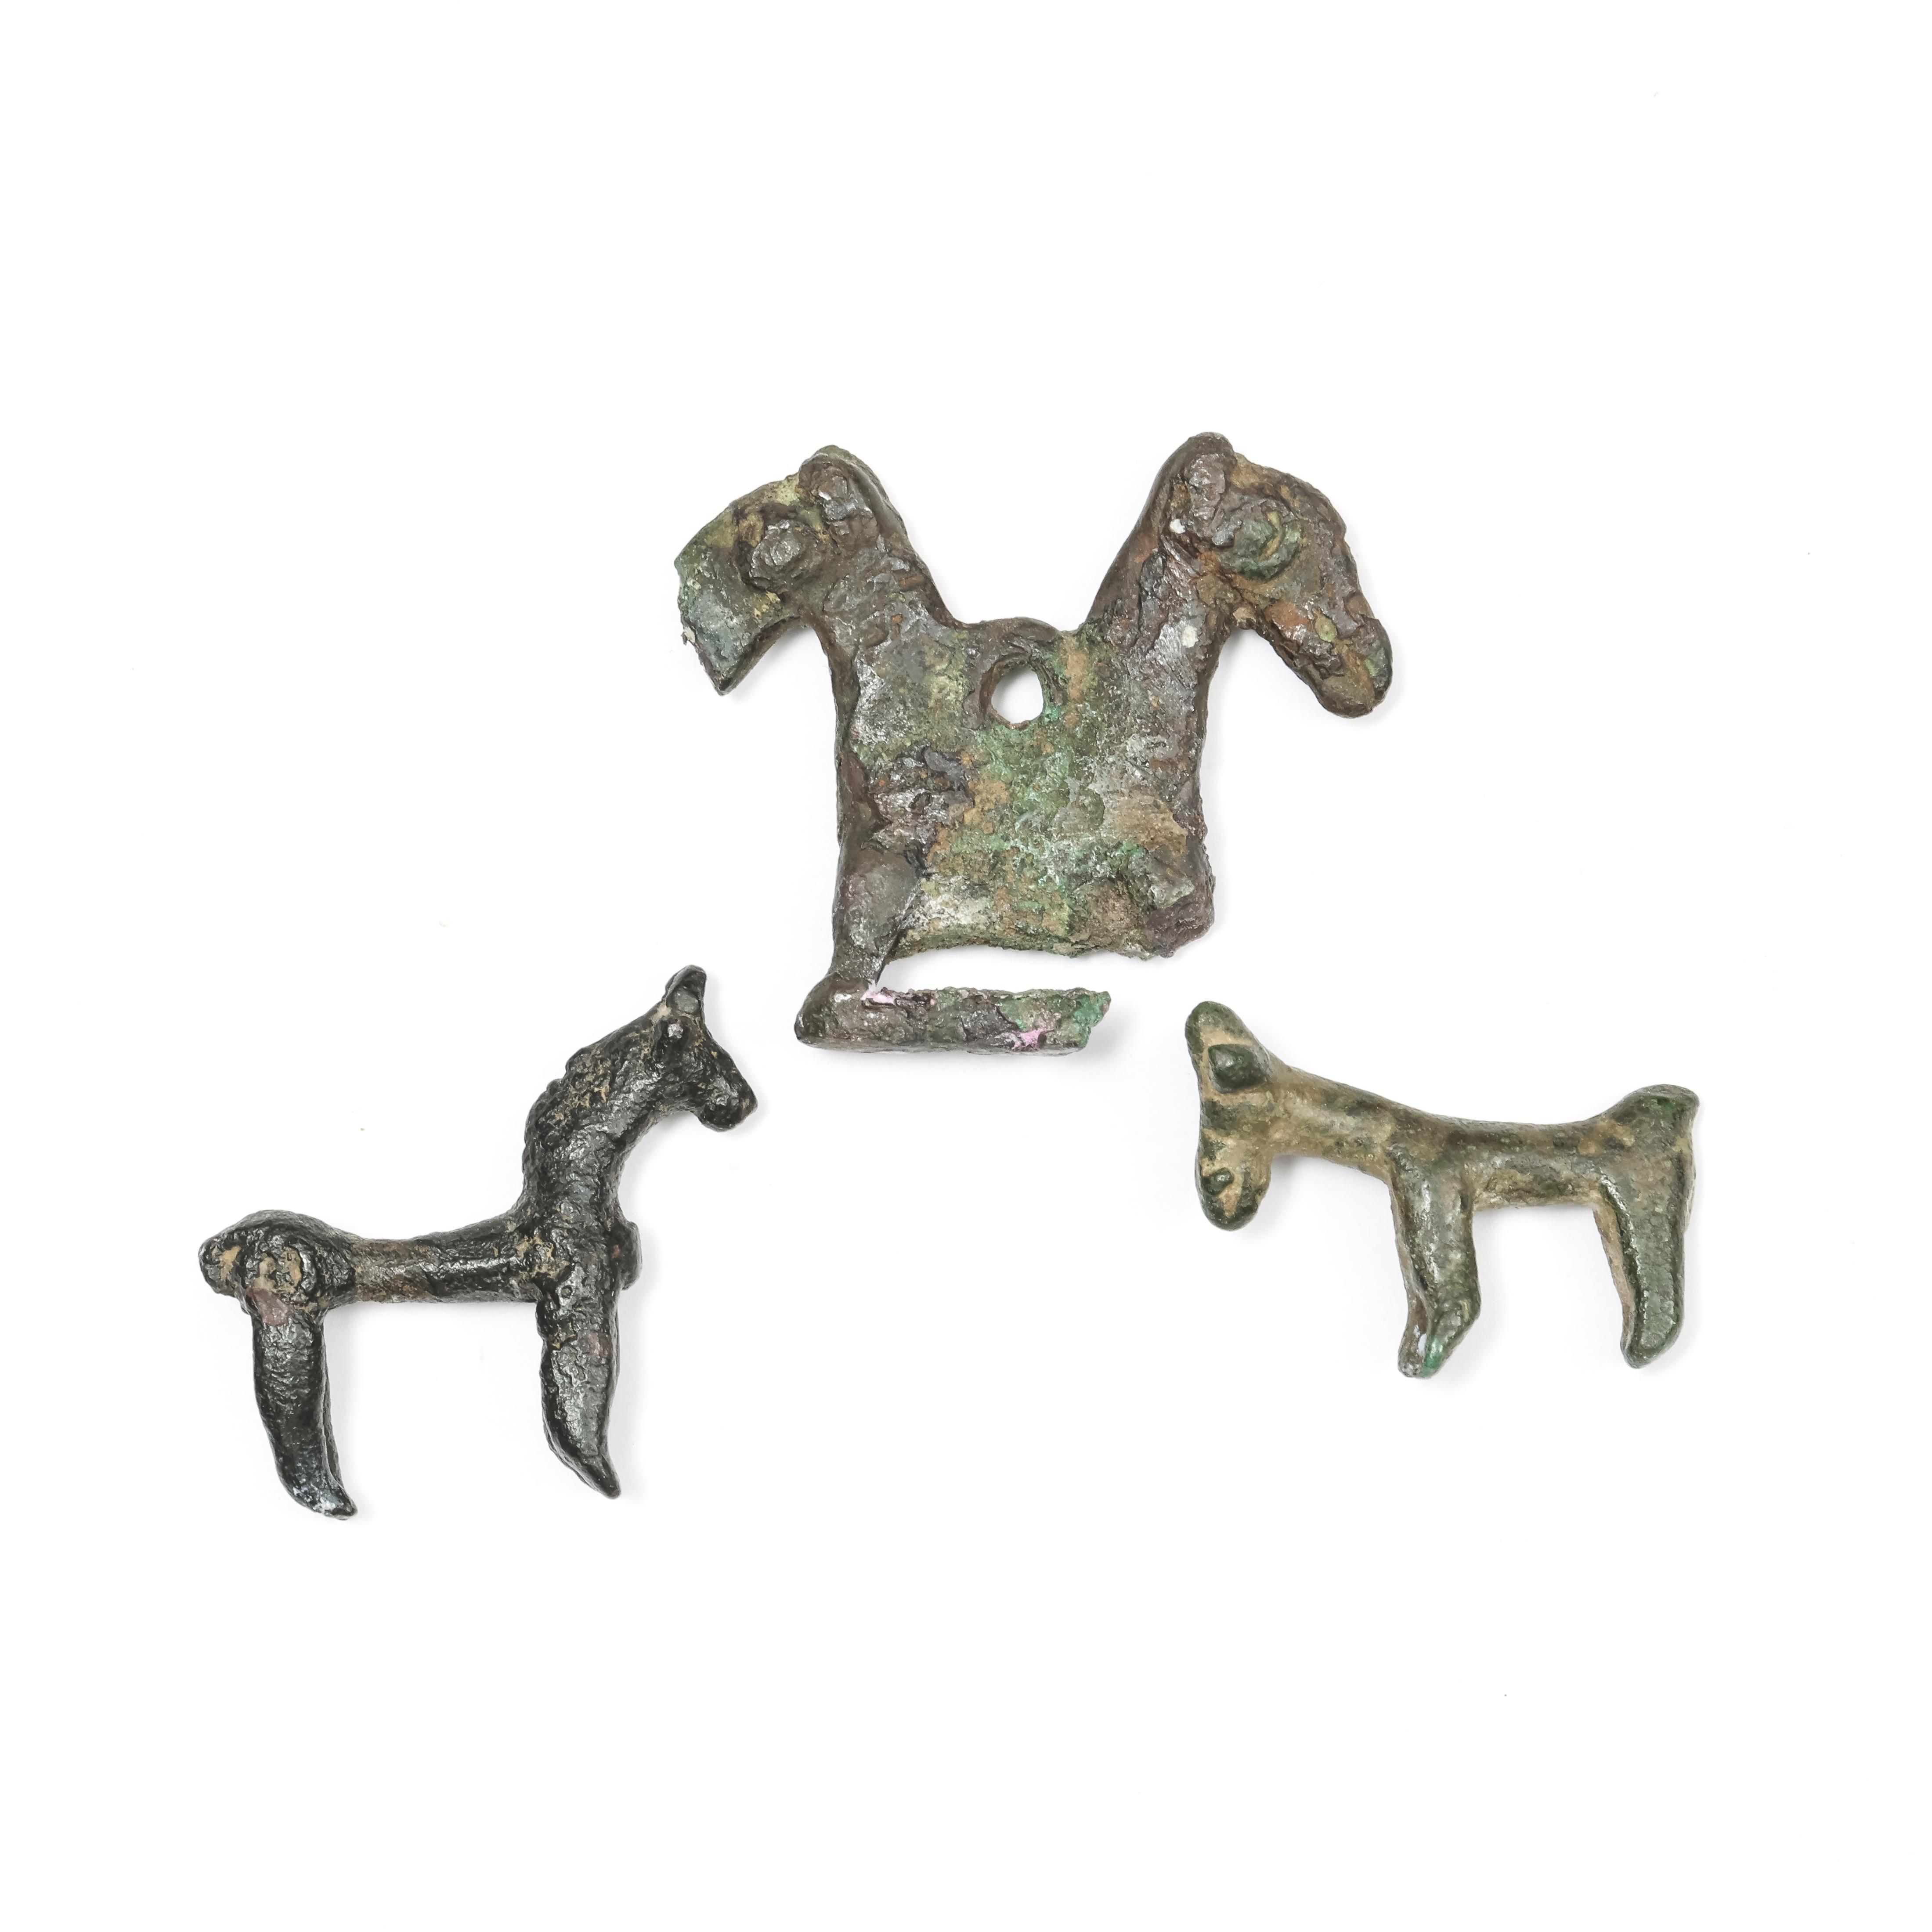 Wester Iran, three bronze small horse statues-amulets, ca. 1000-600 BC. - Image 2 of 2